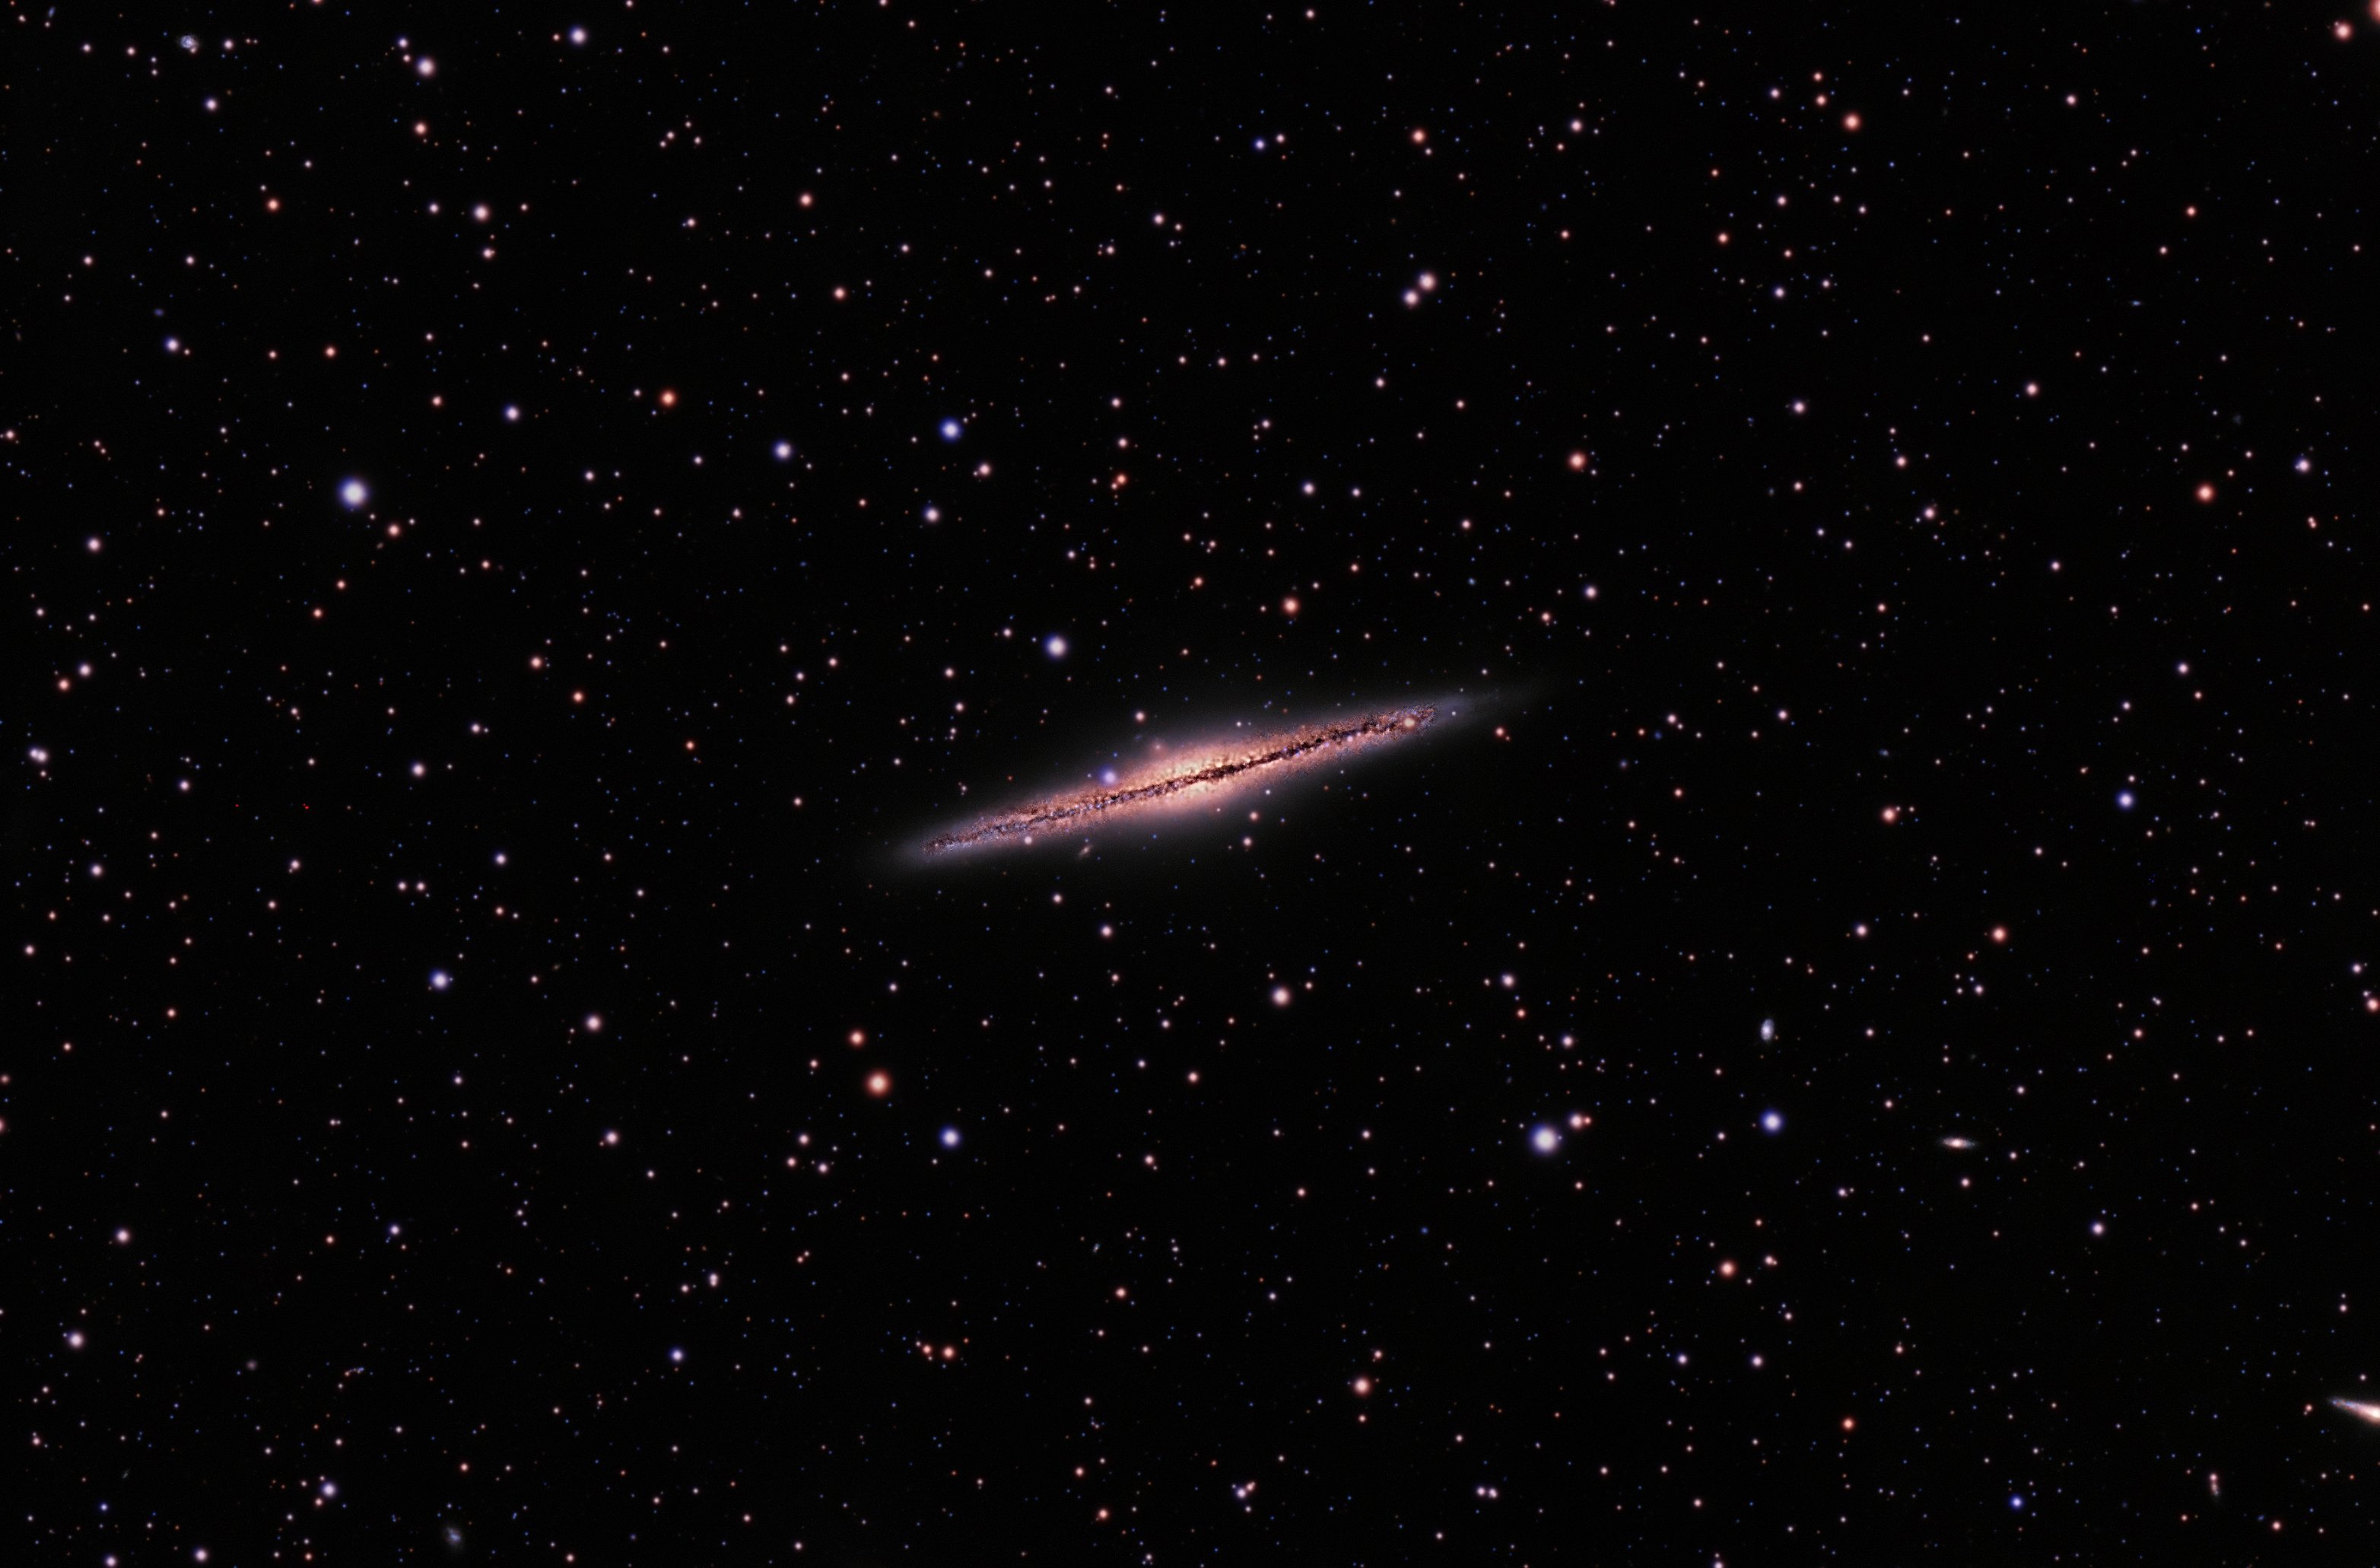 NGC 891 Silver Sliver Galaxy in Andromeda